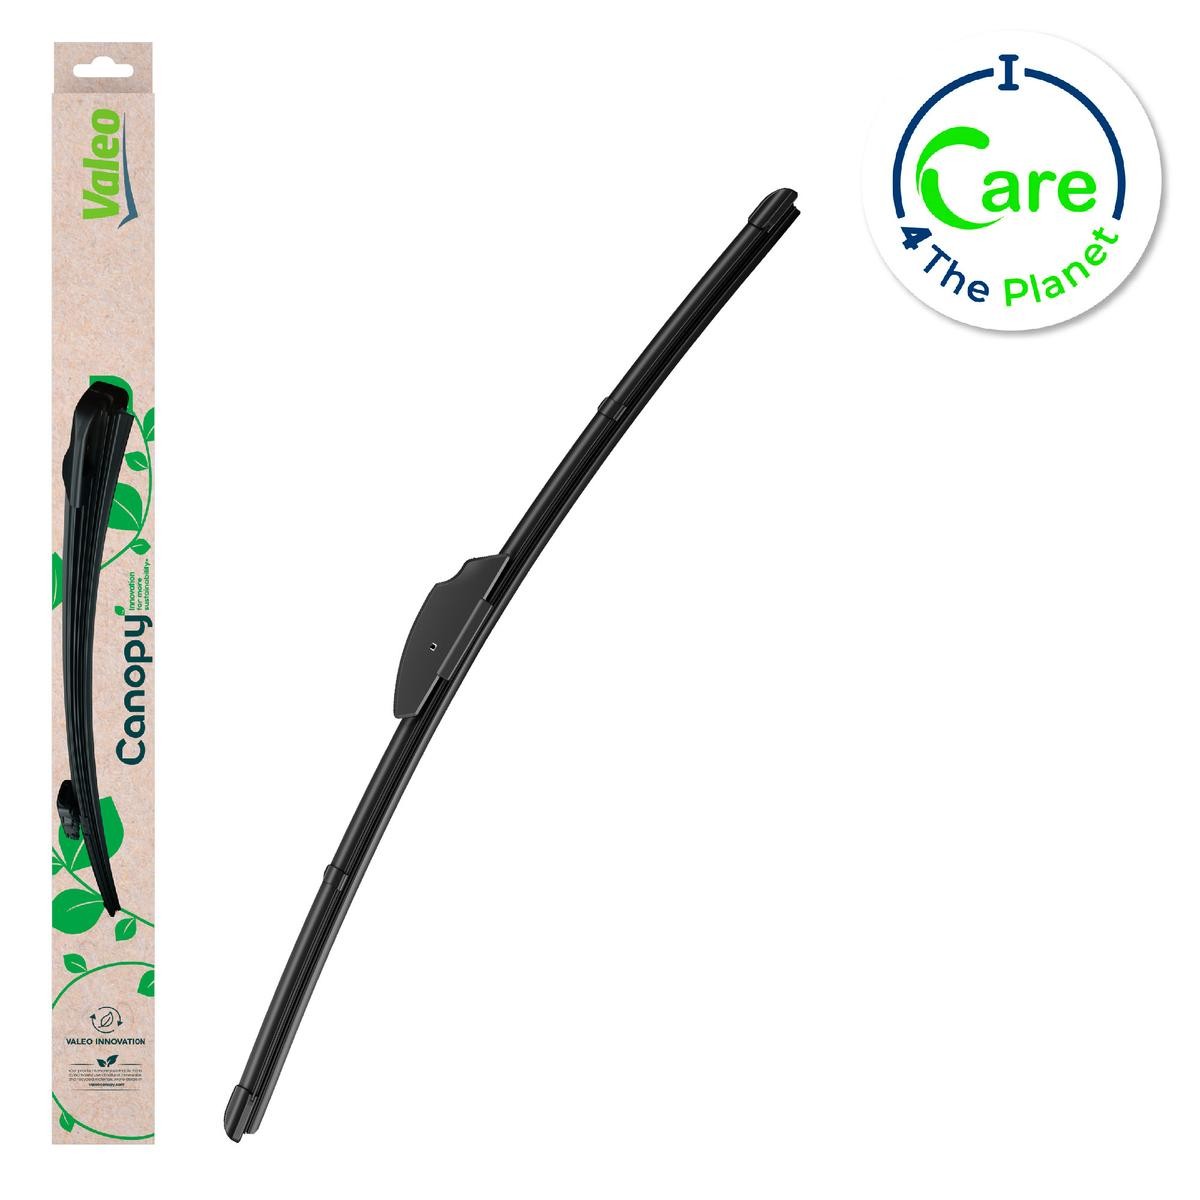 CAN08 VALEO CANOPY 500 mm, Flat wiper blade, Rubber wiper from >80 % sustainable materials, with spoiler, 20 Inch Styling: with spoiler Wiper blades 583908 buy